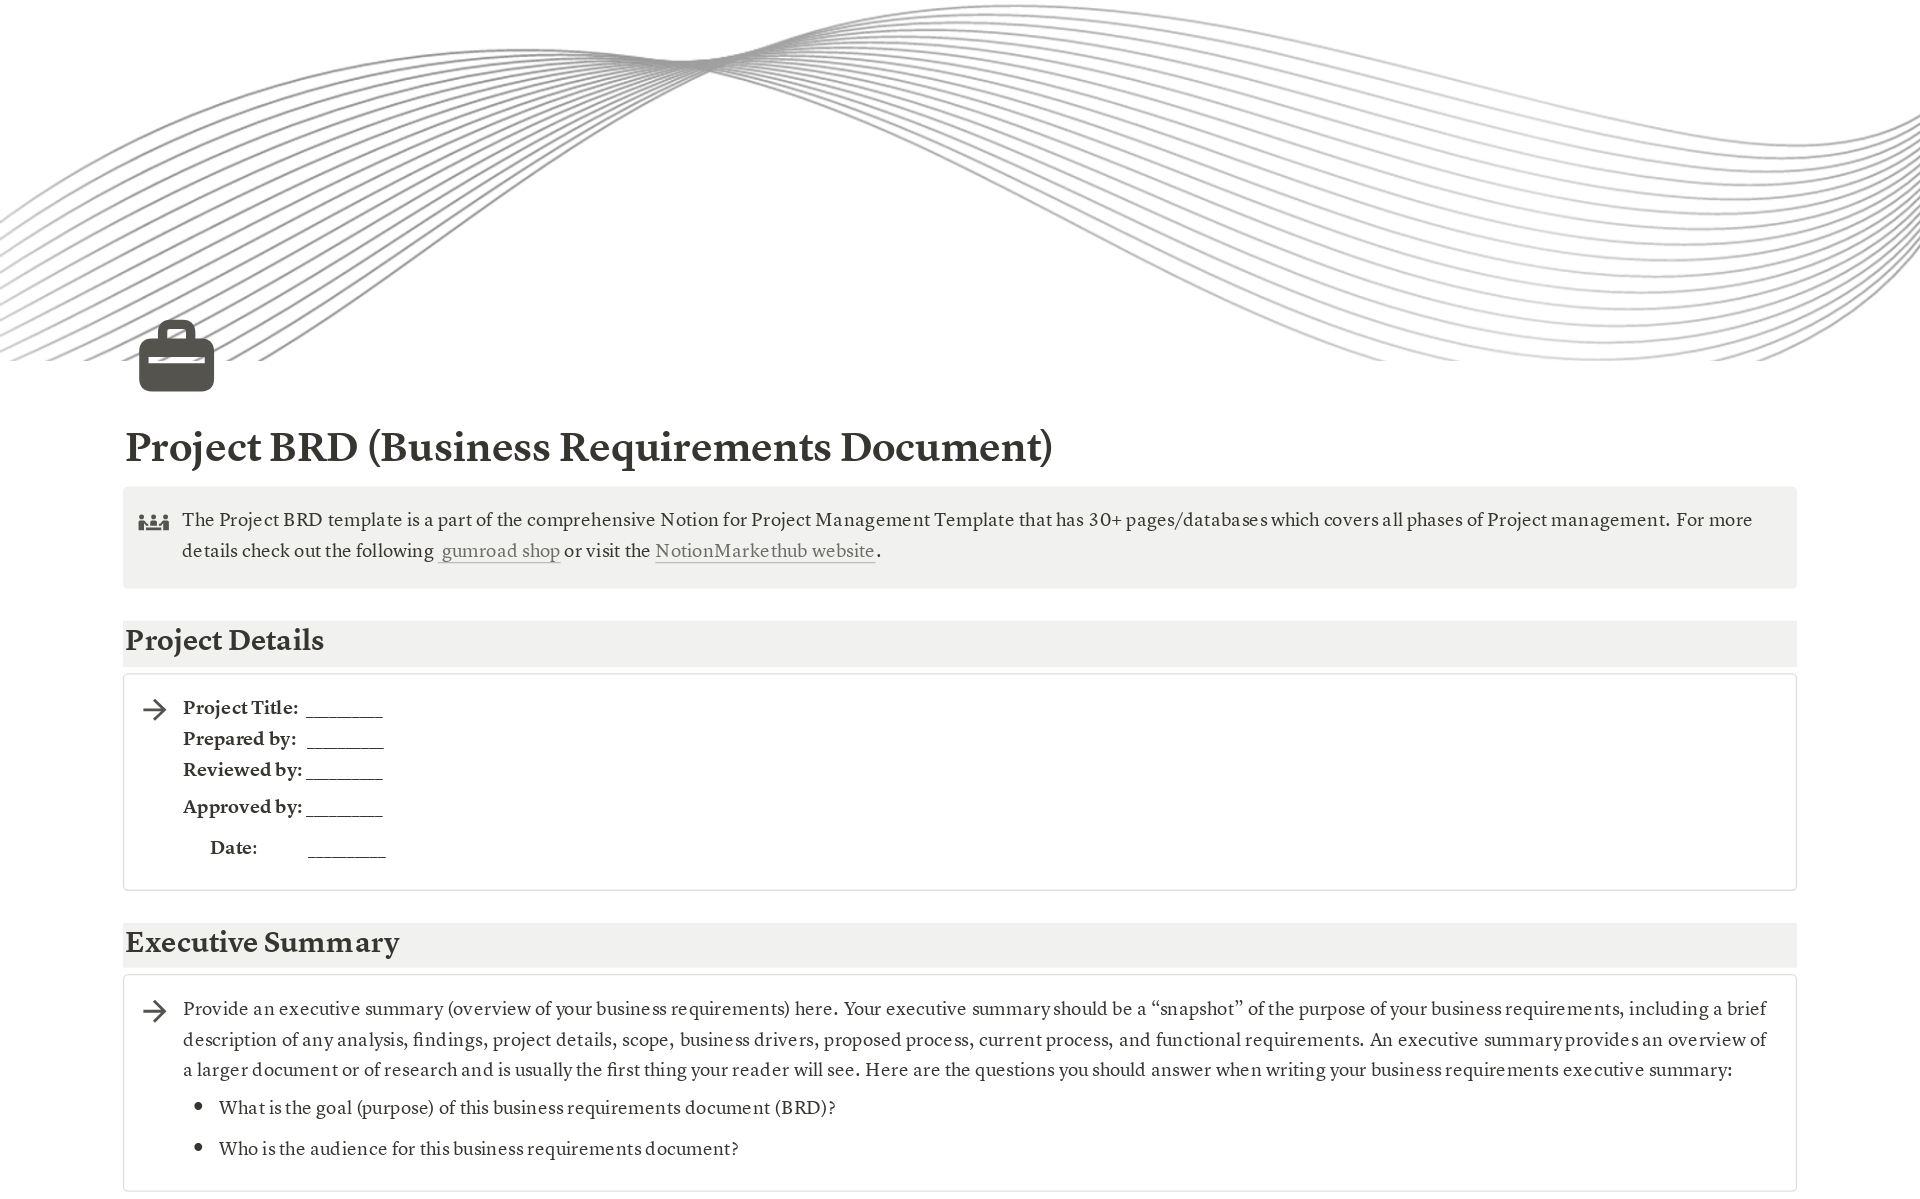 Business Requirements Document BRD for Projects님의 템플릿 미리보기